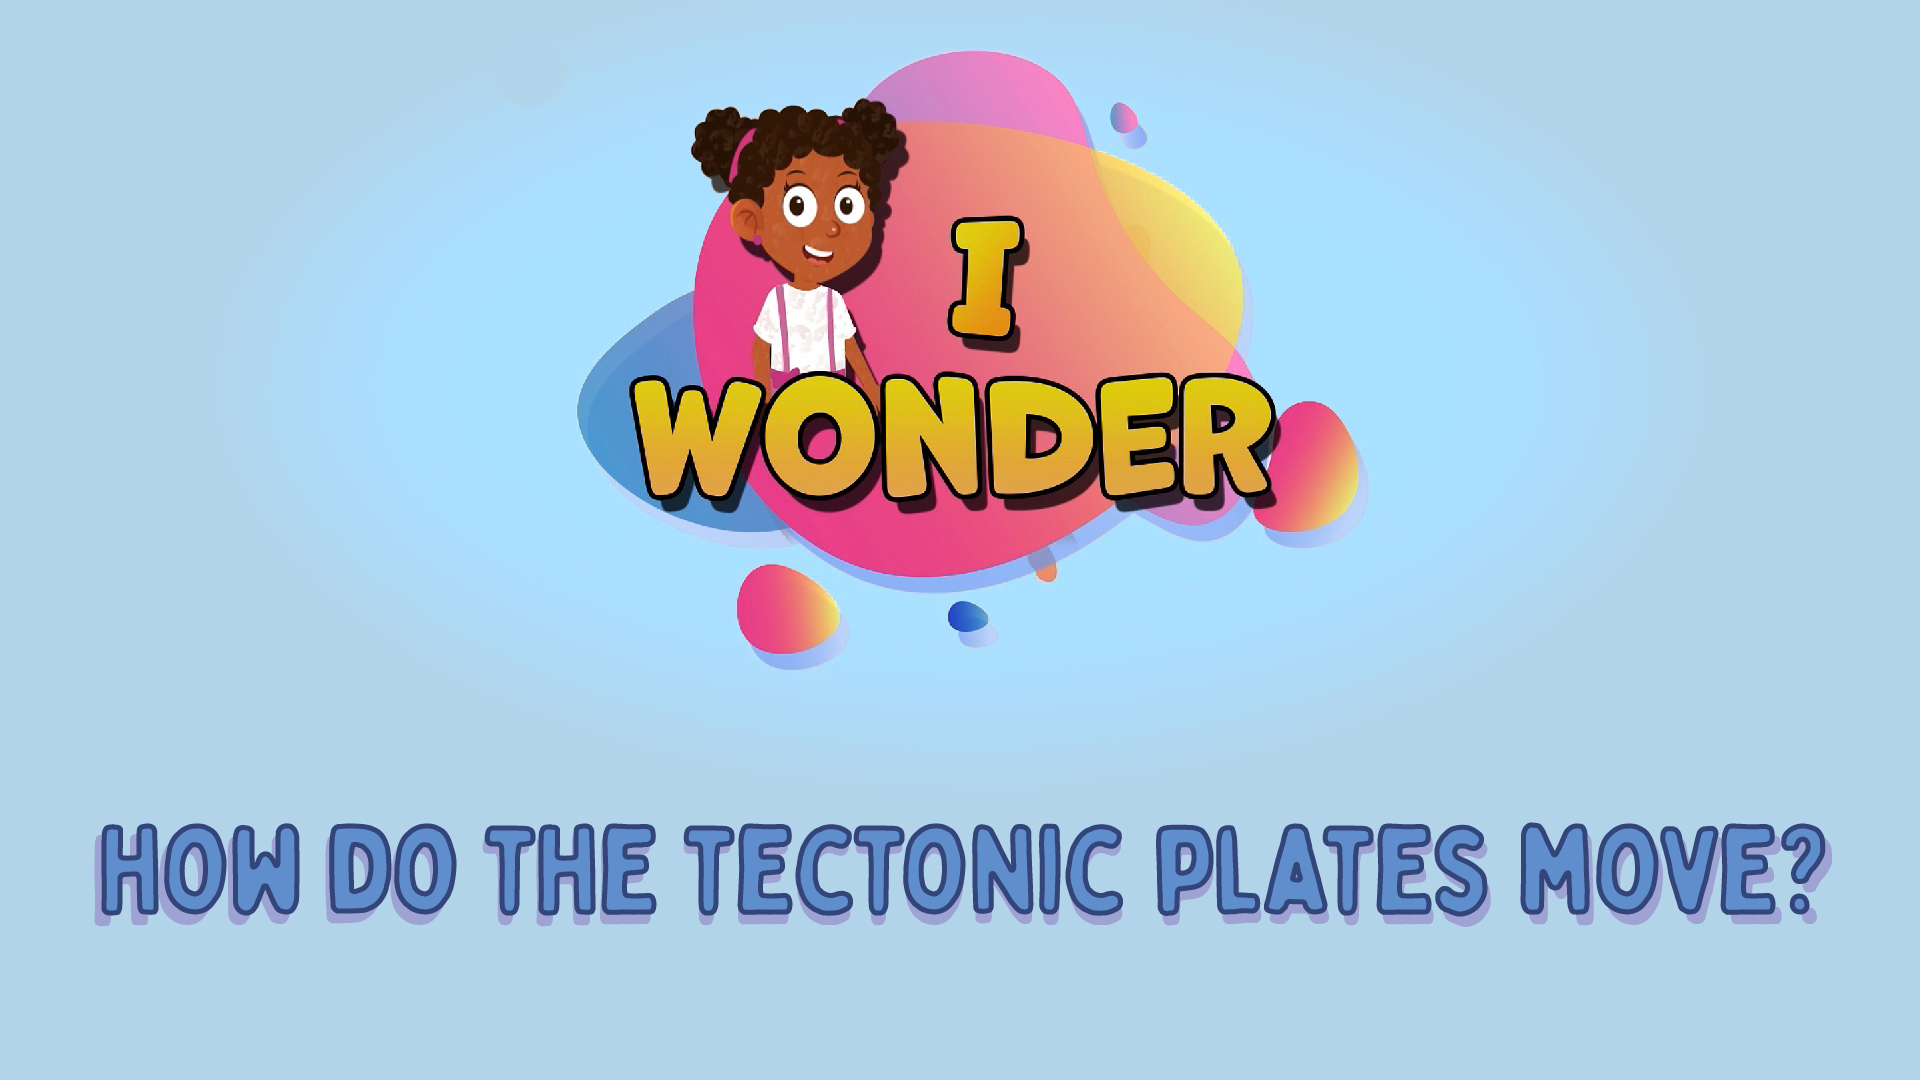 How Do The Tectonic Plates Move?